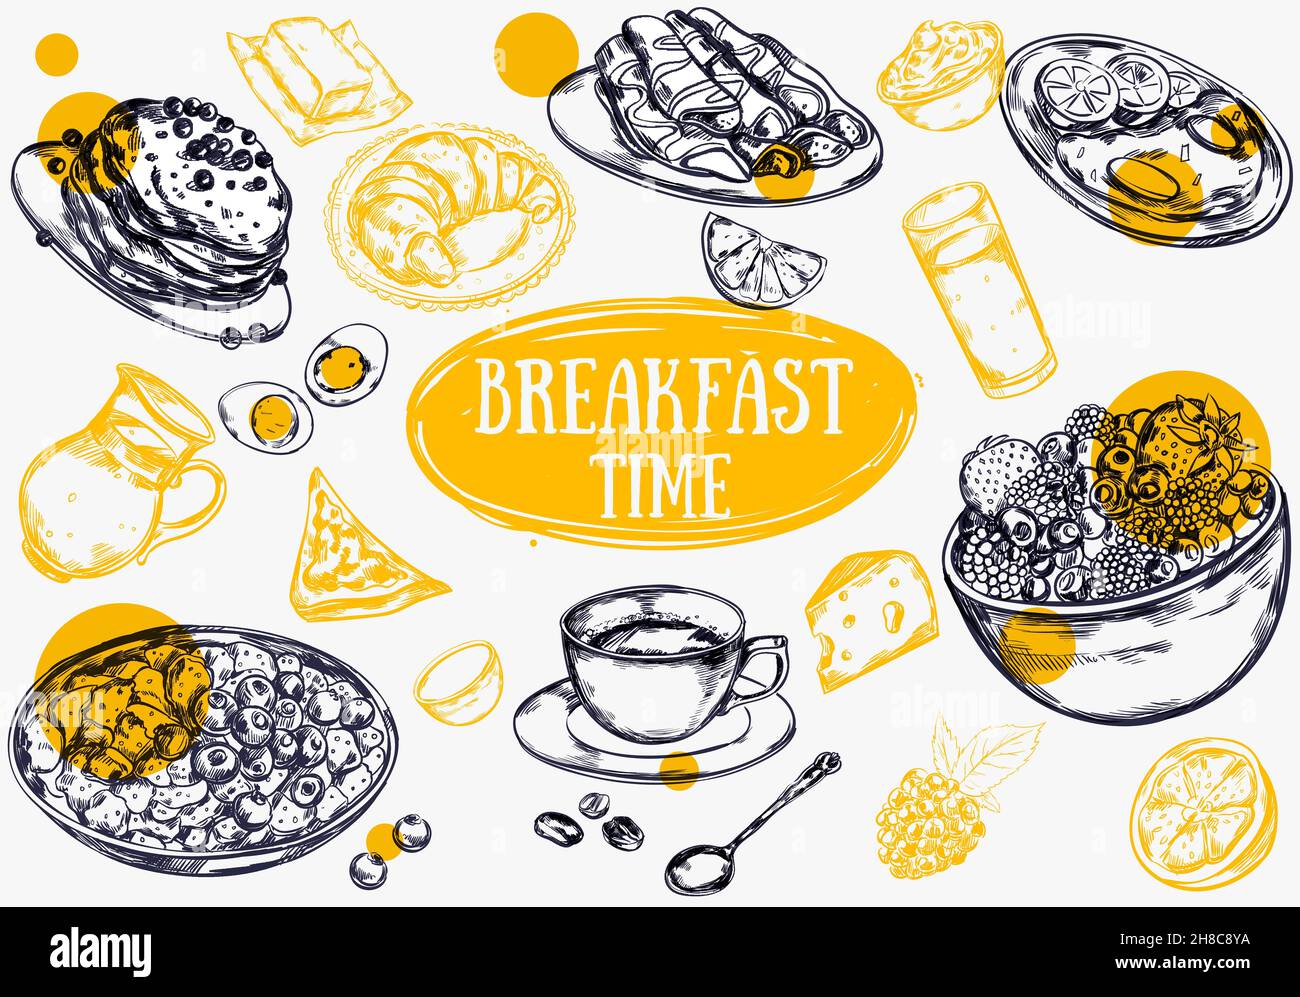 Colored food breakfast brochure with isolated black and yellow elements and attributes vector illustration Stock Vector